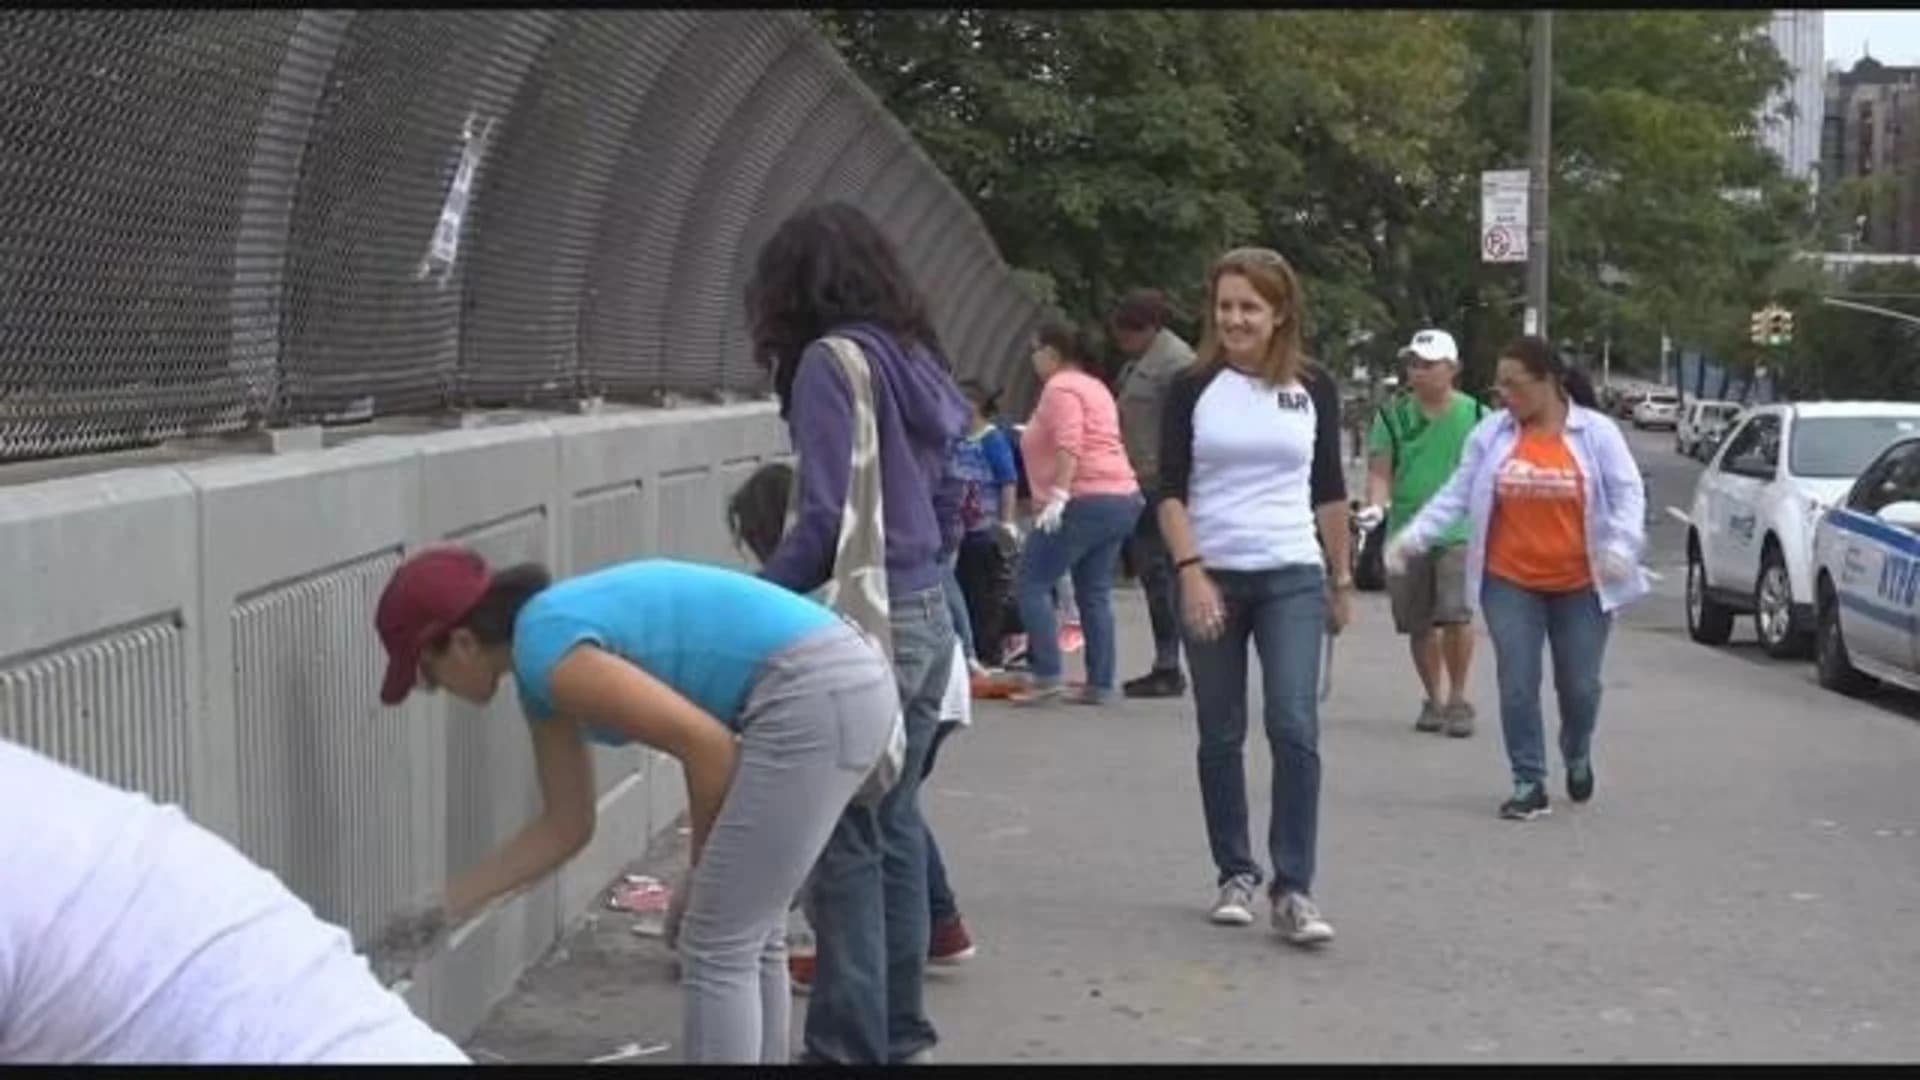 BX group brings residents together for community service